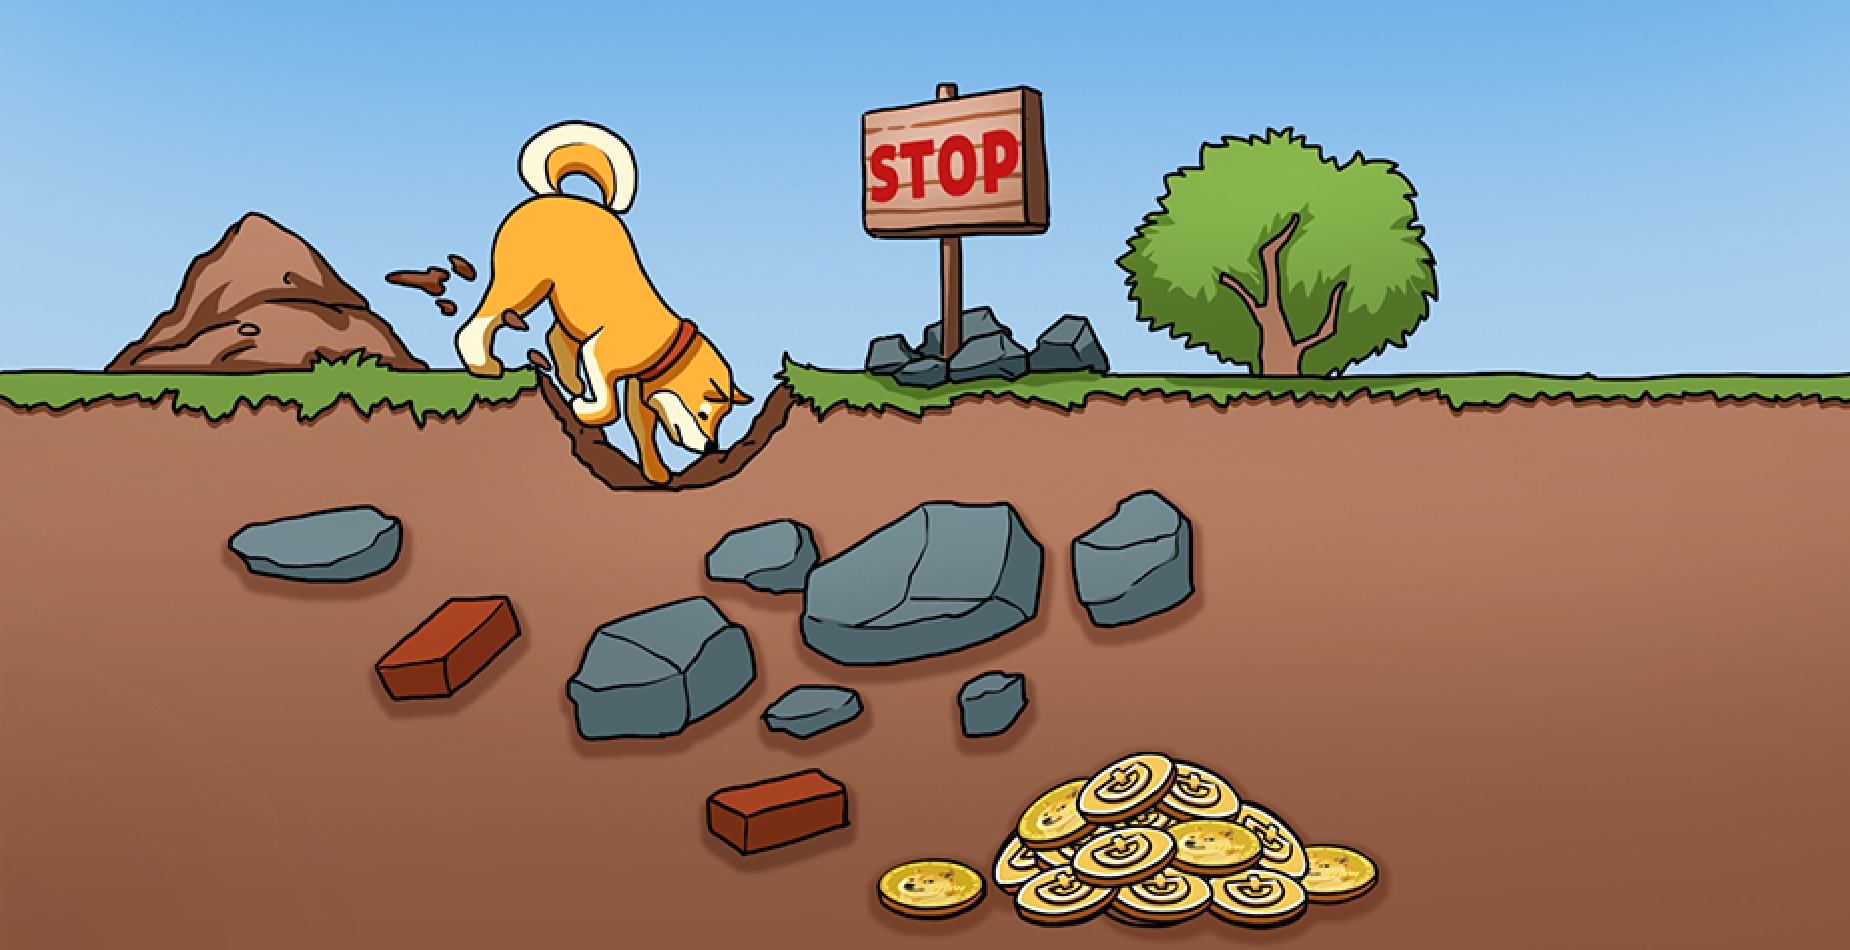 Shiba Inu digging for Dogecoins towards an insurmountable not yet visible obstacle under the ground.